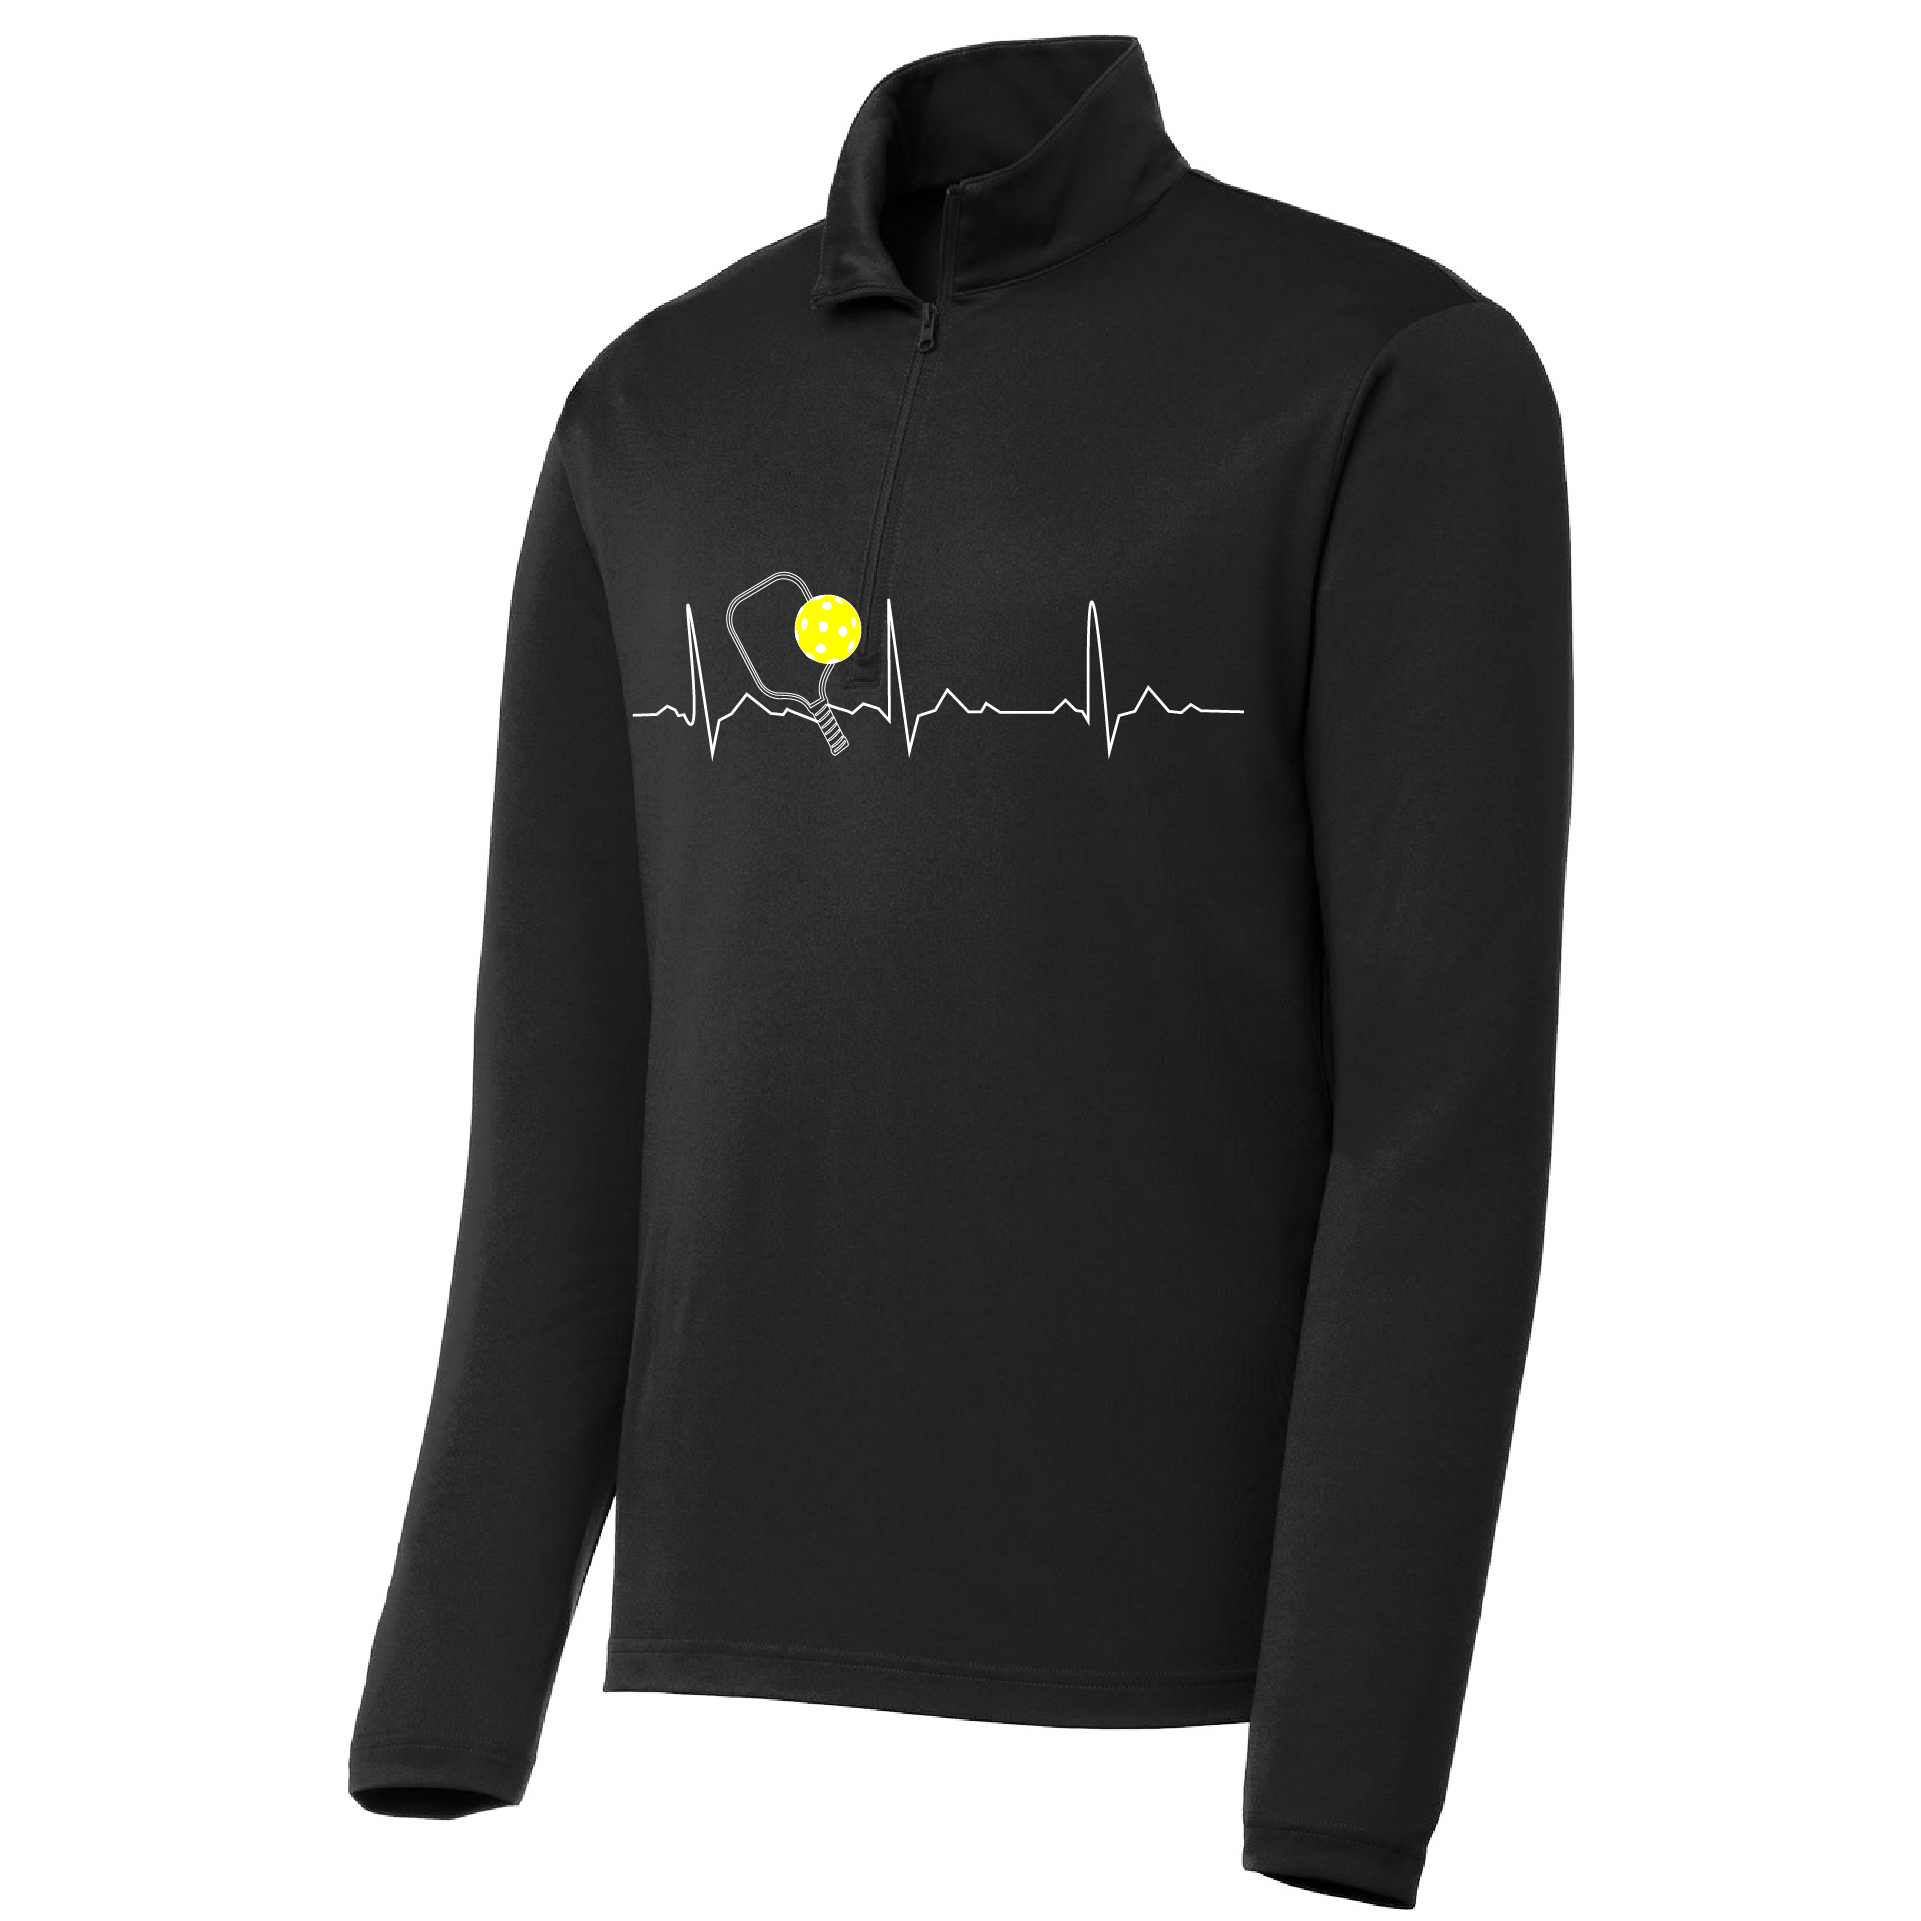 Pickleball Design: Pickleball Heartbeat Customizable location  Men's 1/4-Zip Pullover  Turn up the volume in this Men's shirt with its perfect mix of softness and attitude. Material is ultra-comfortable with moisture wicking properties and tri-blend softness. PosiCharge technology locks in color. Highly breathable and lightweight. Versatile enough for wearing year-round.